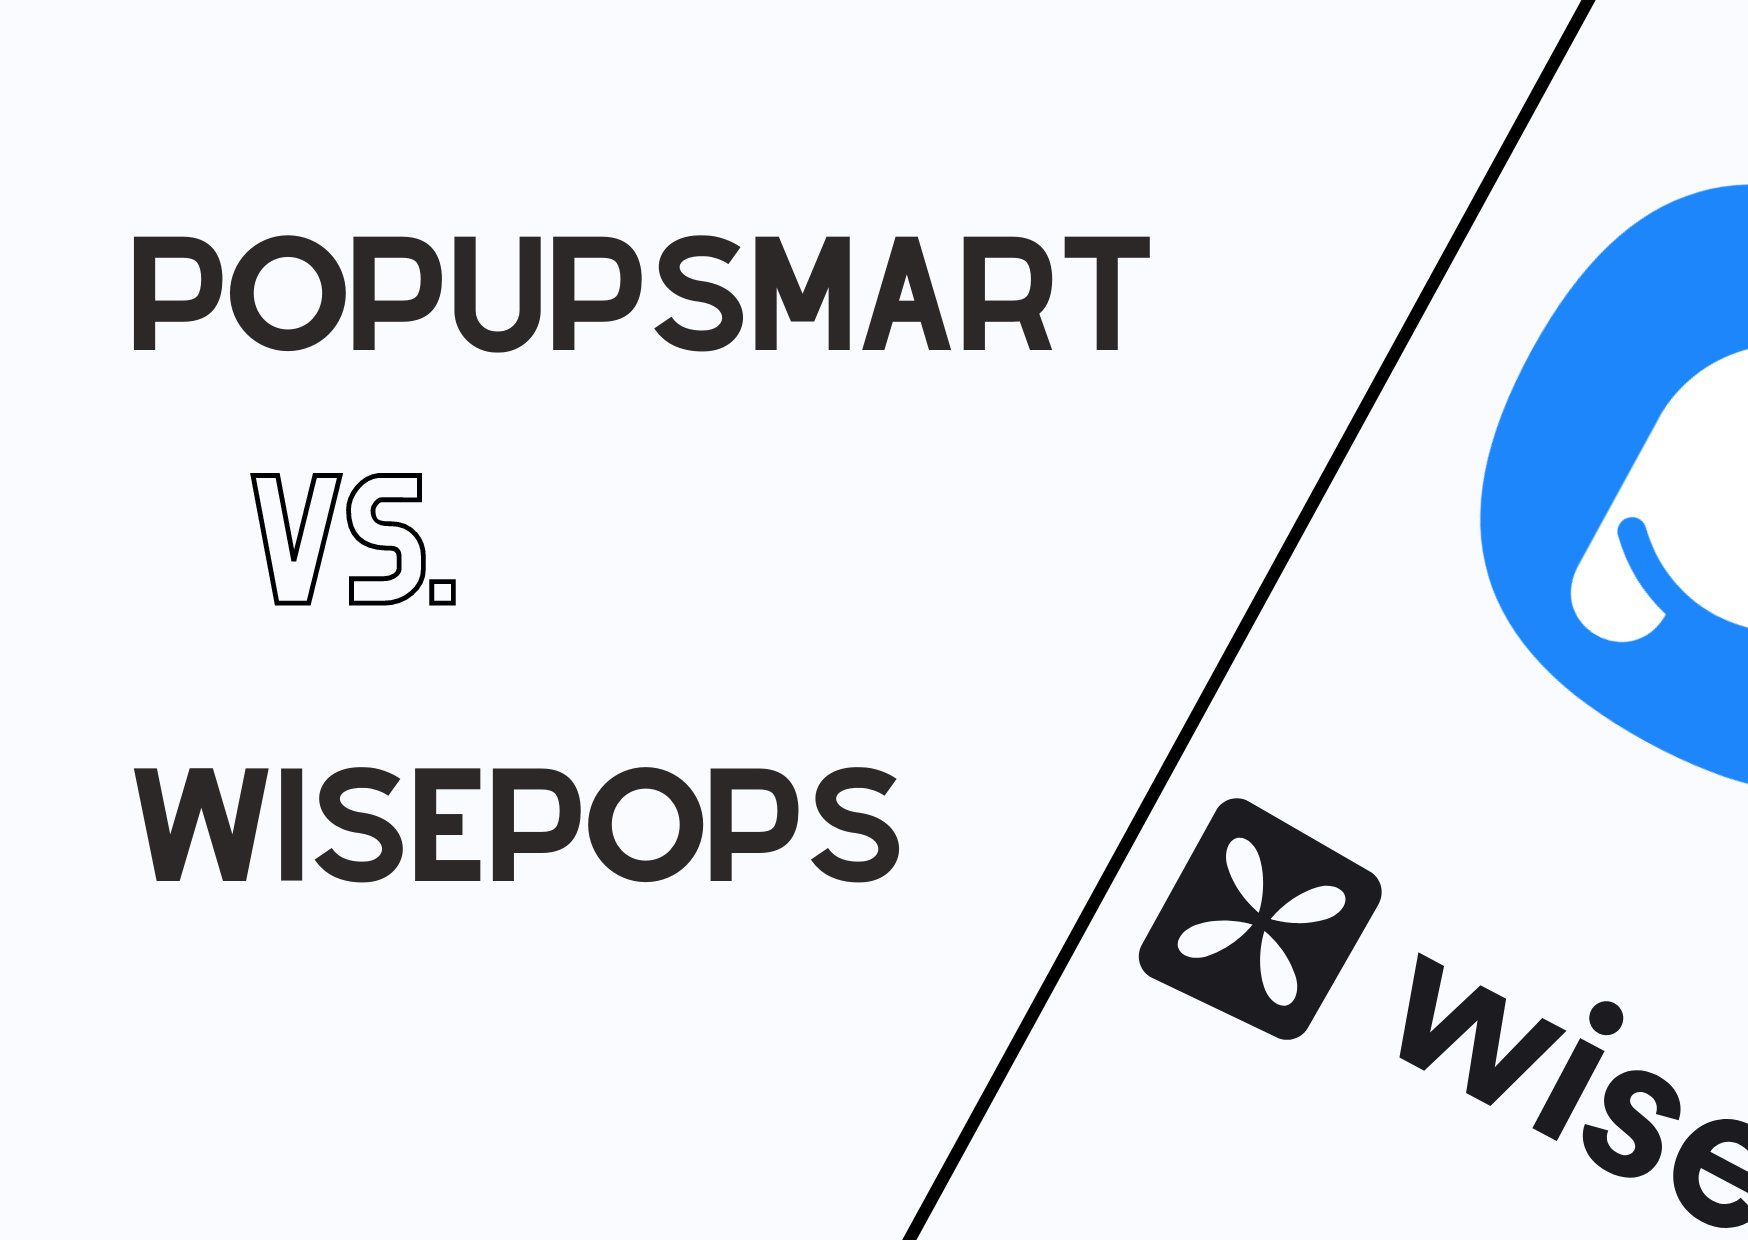 Popupsmart and Wisepops comparison with its title and logos of the brands